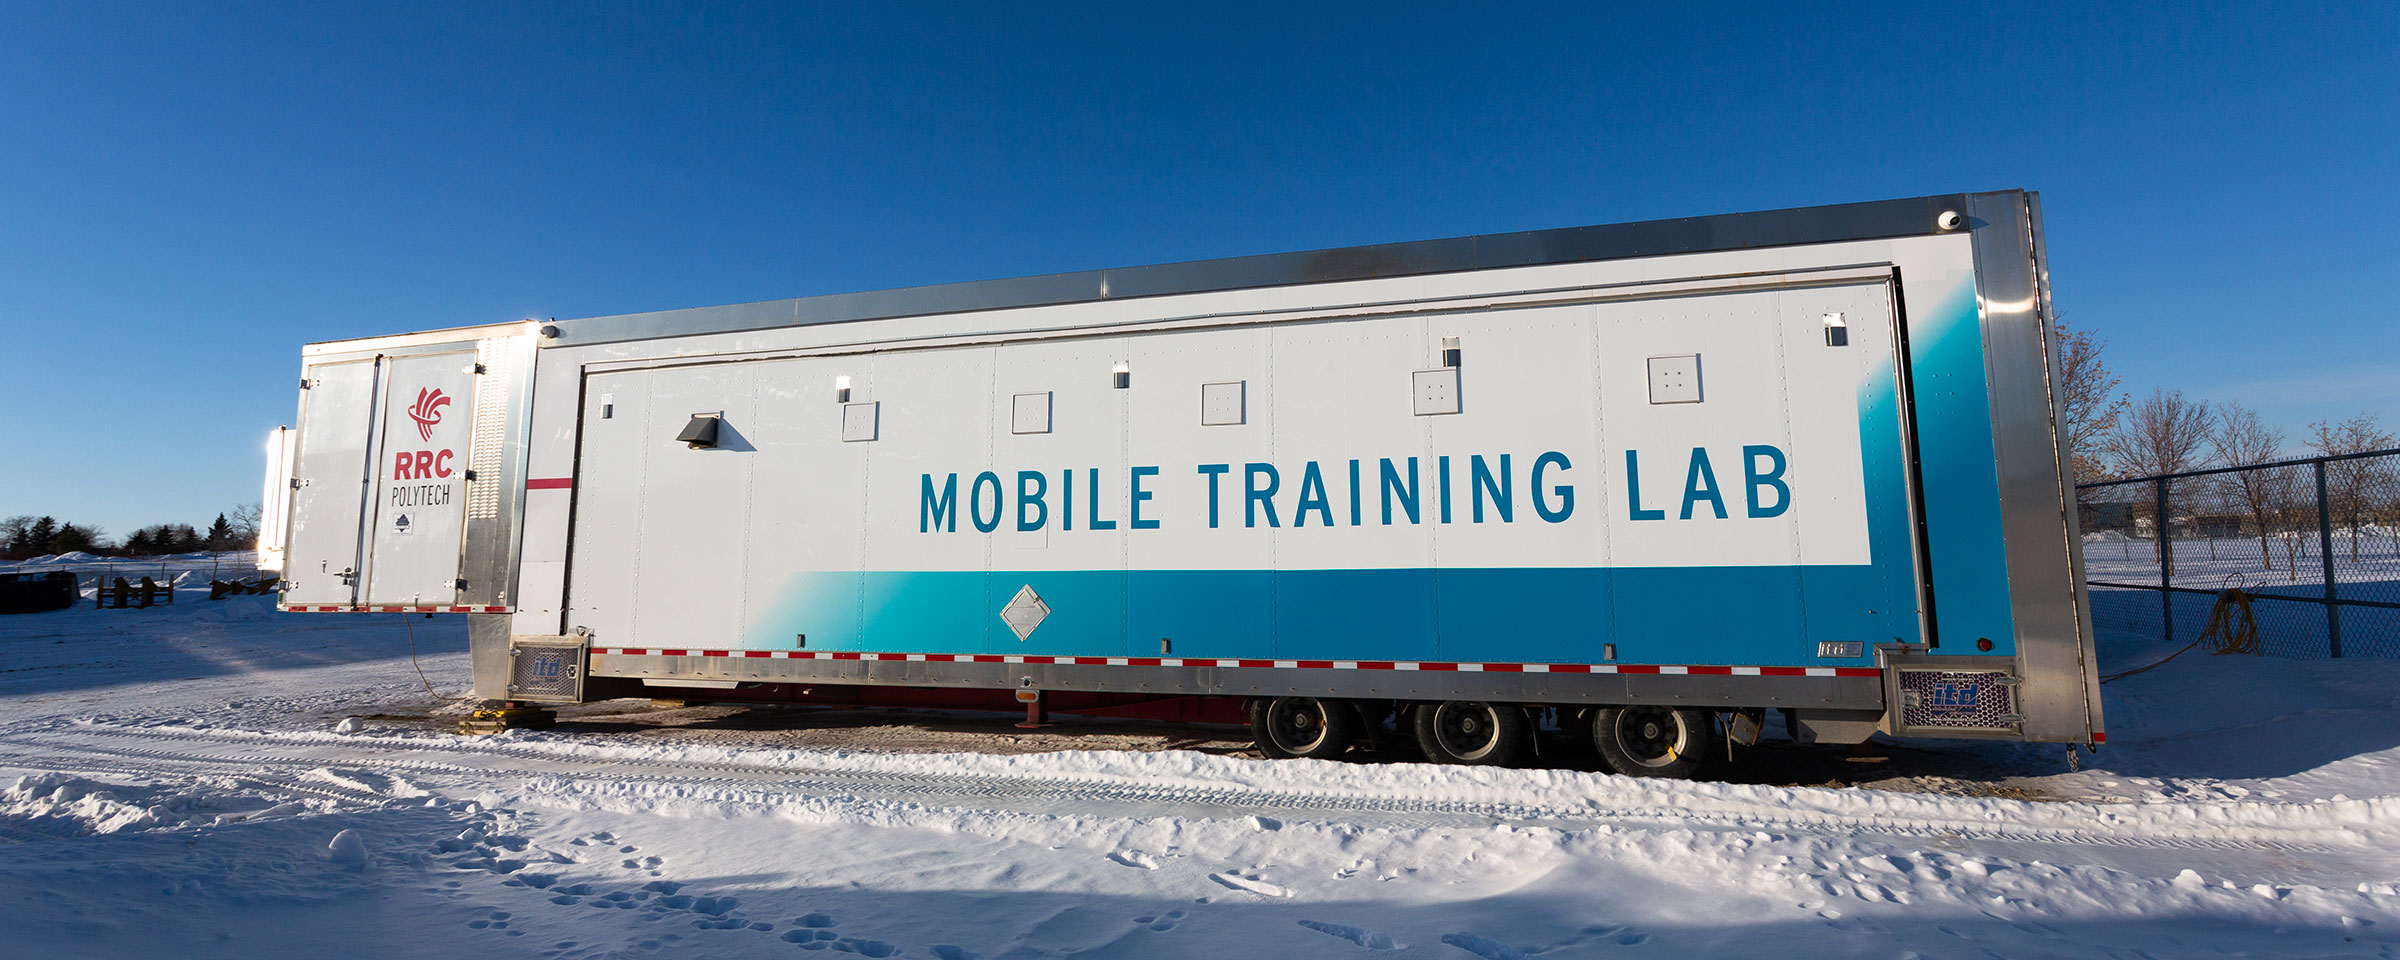 Mobile Training Lab for remote training